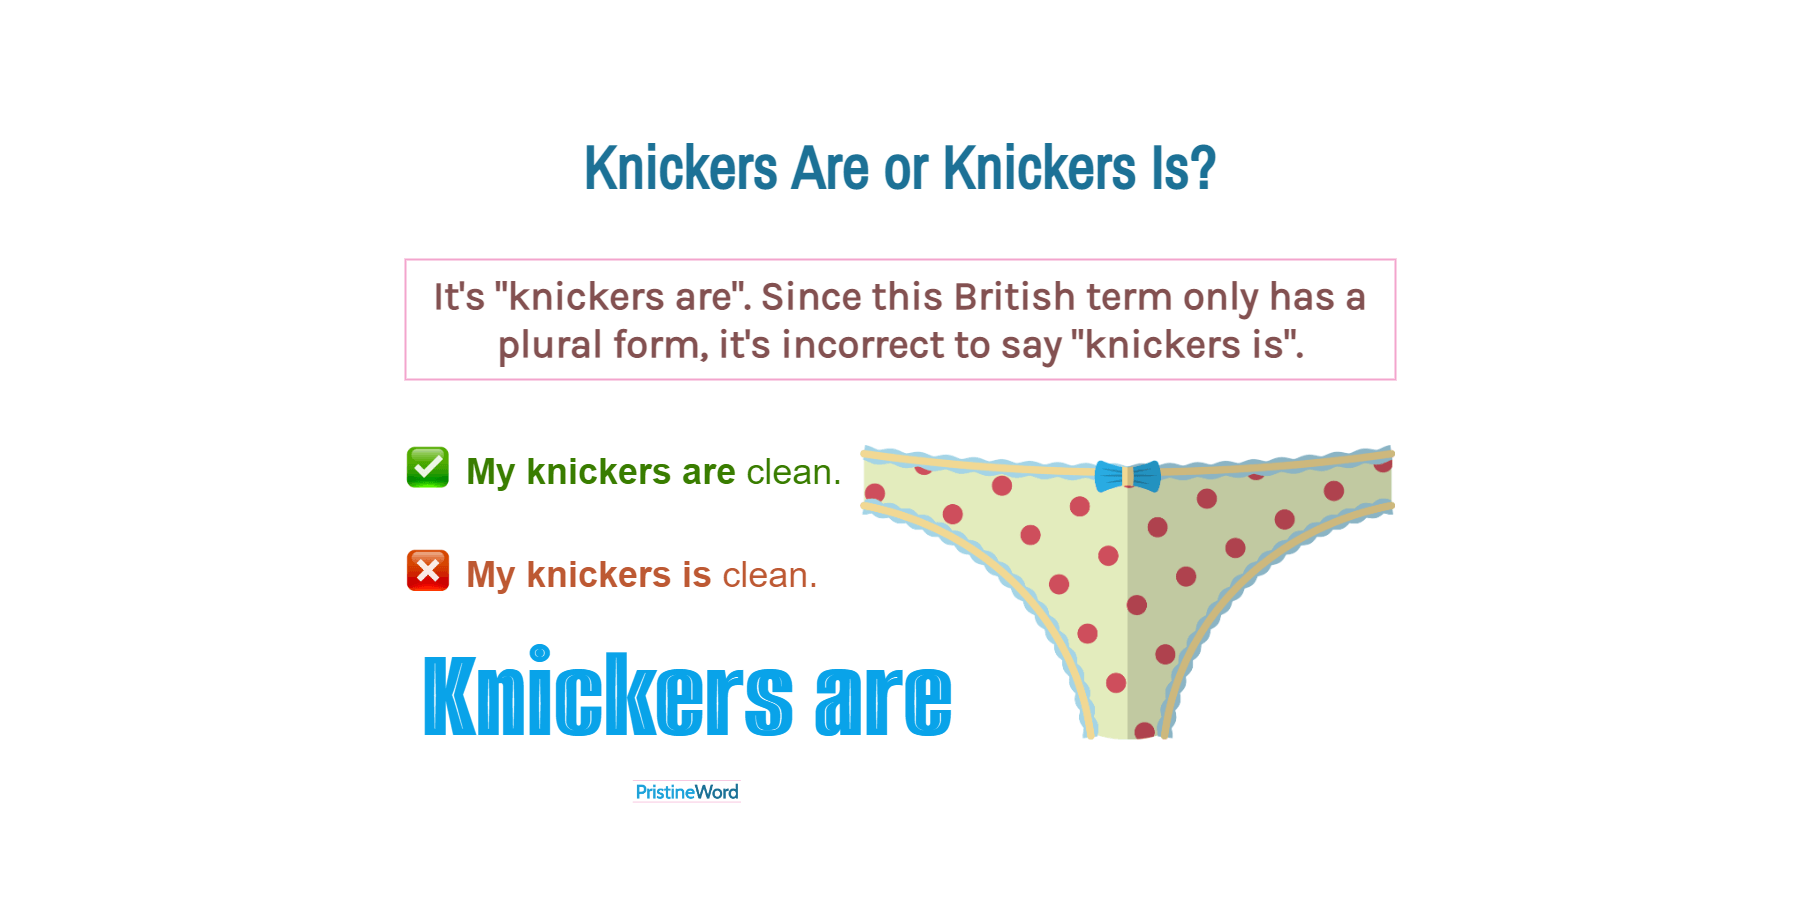 Knickers Are Or Knickers Is. Which Is Correct?